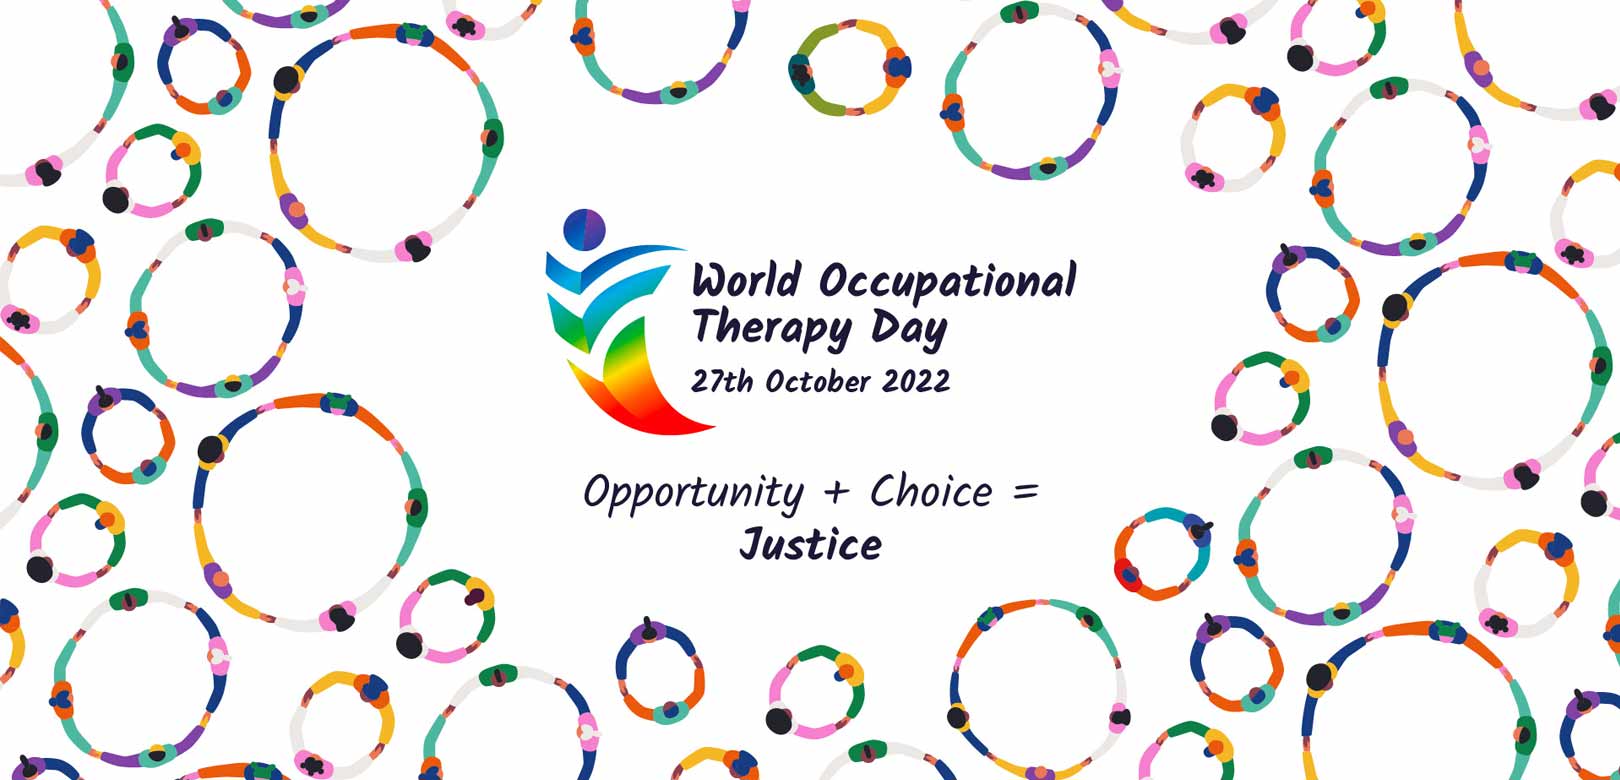 Getting to know our team for World Occupational Therapy Day